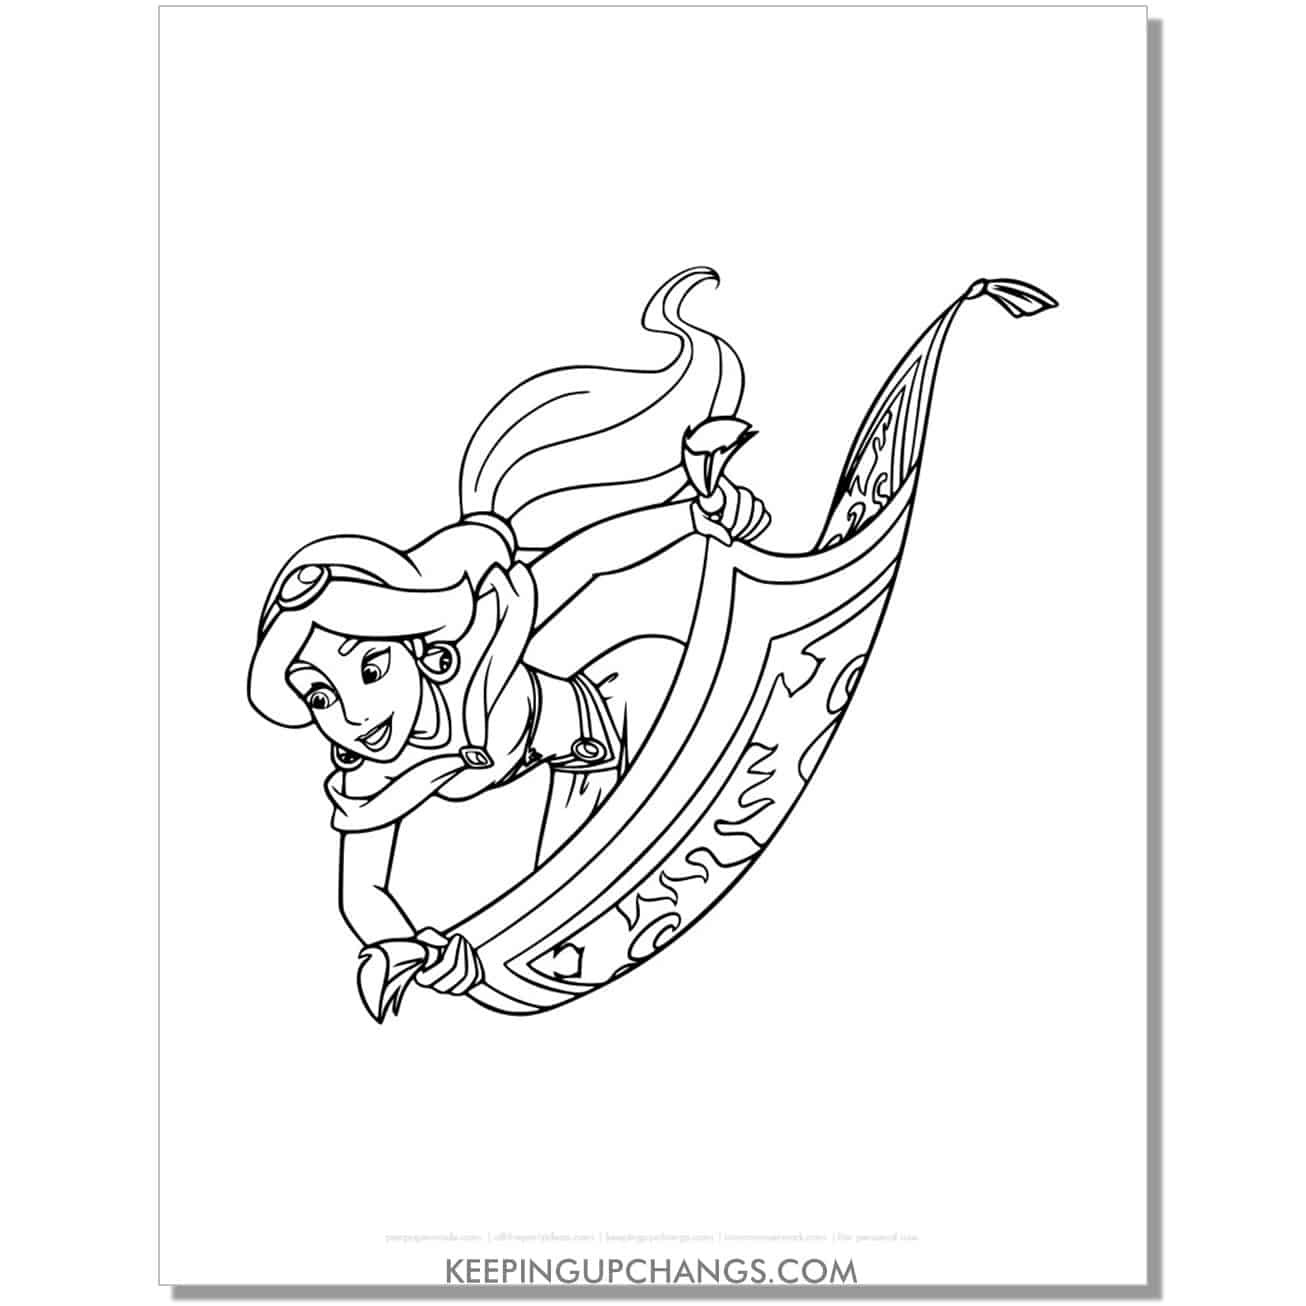 jasmine on flying carpet coloring page, sheet.